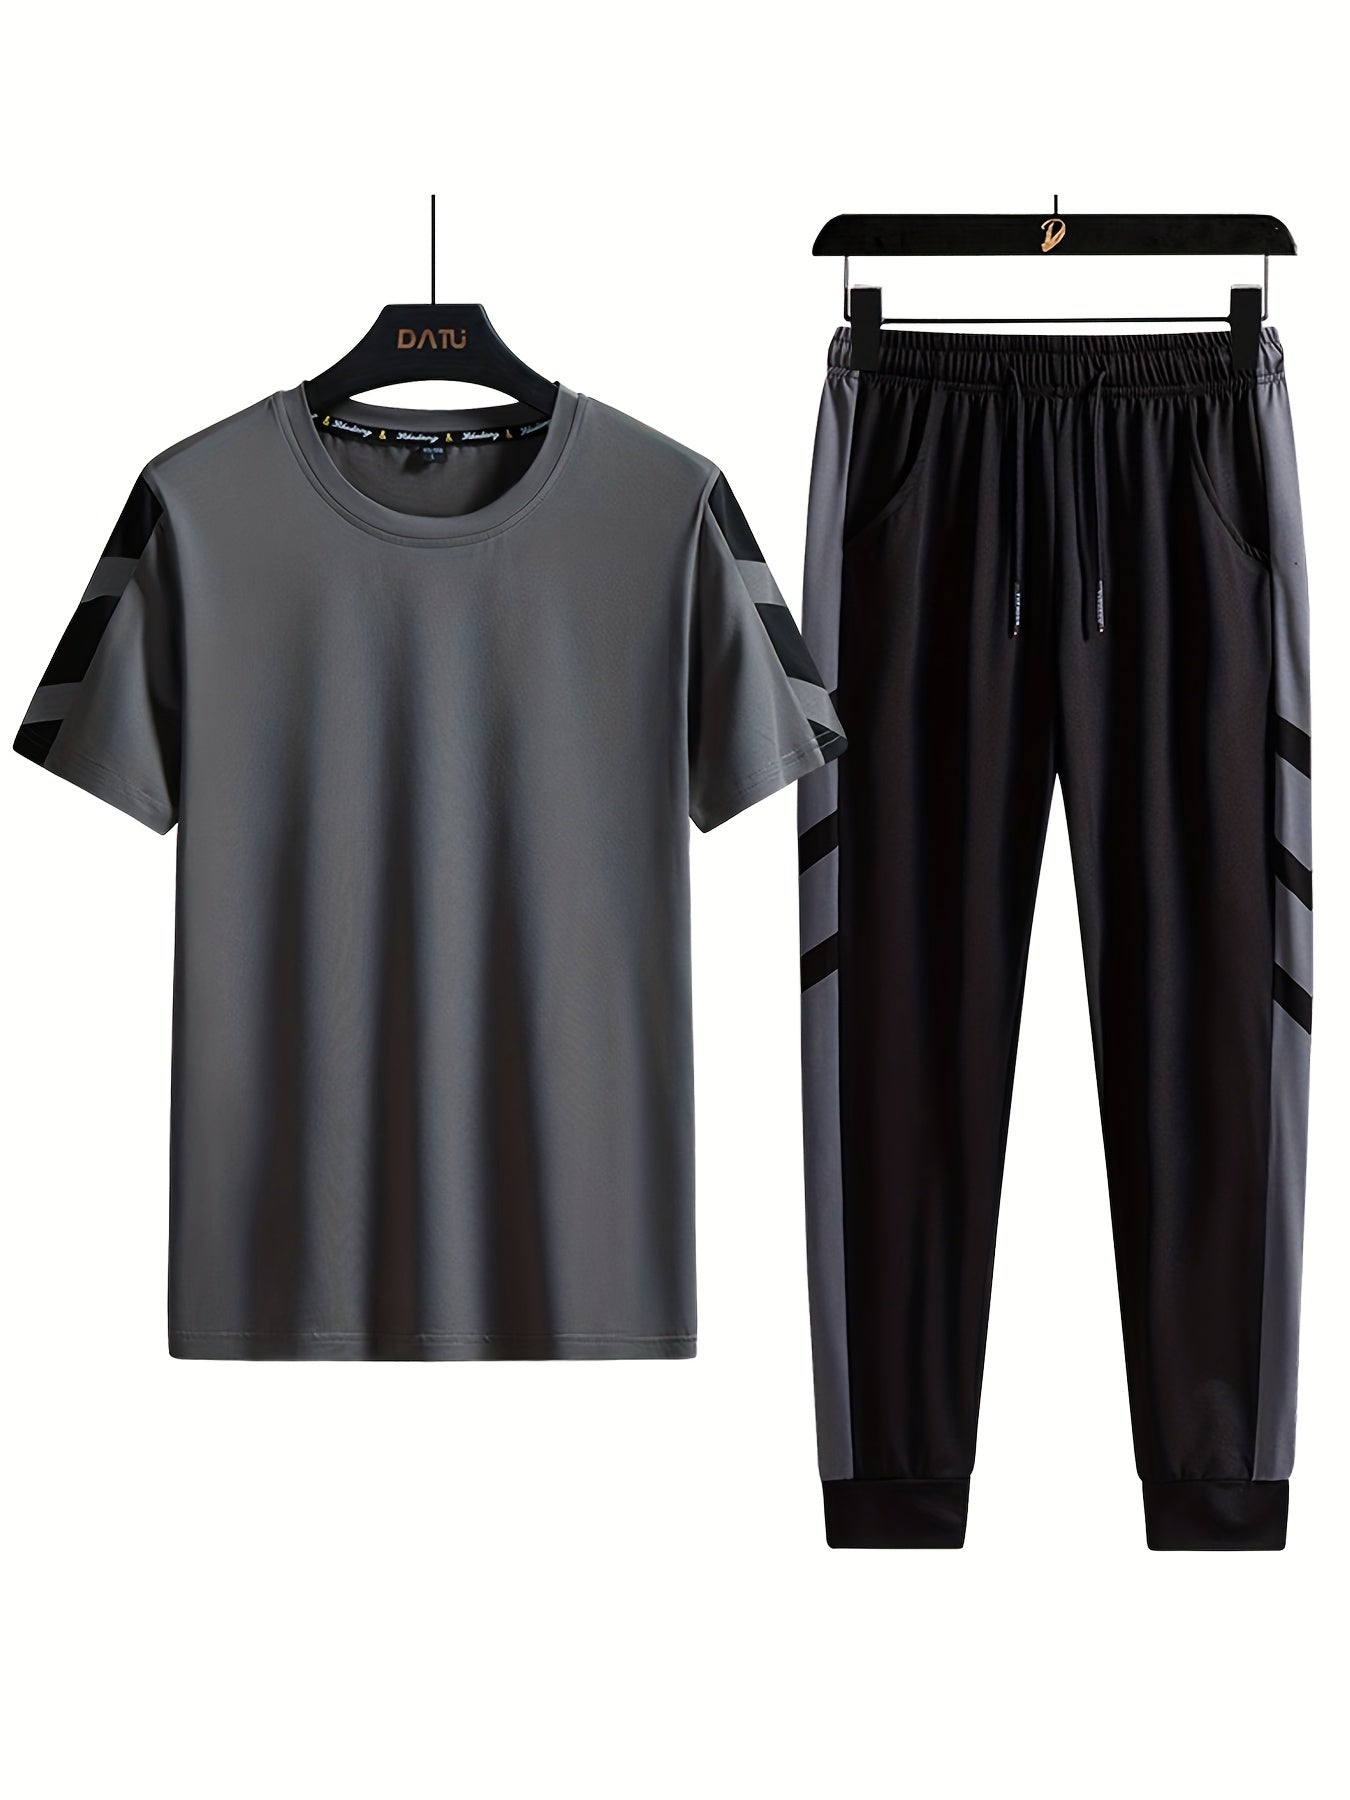 Classic Men's 2 Pieces Outfits, Short Sleeve T-Shirt And Drawstring Trousers Set